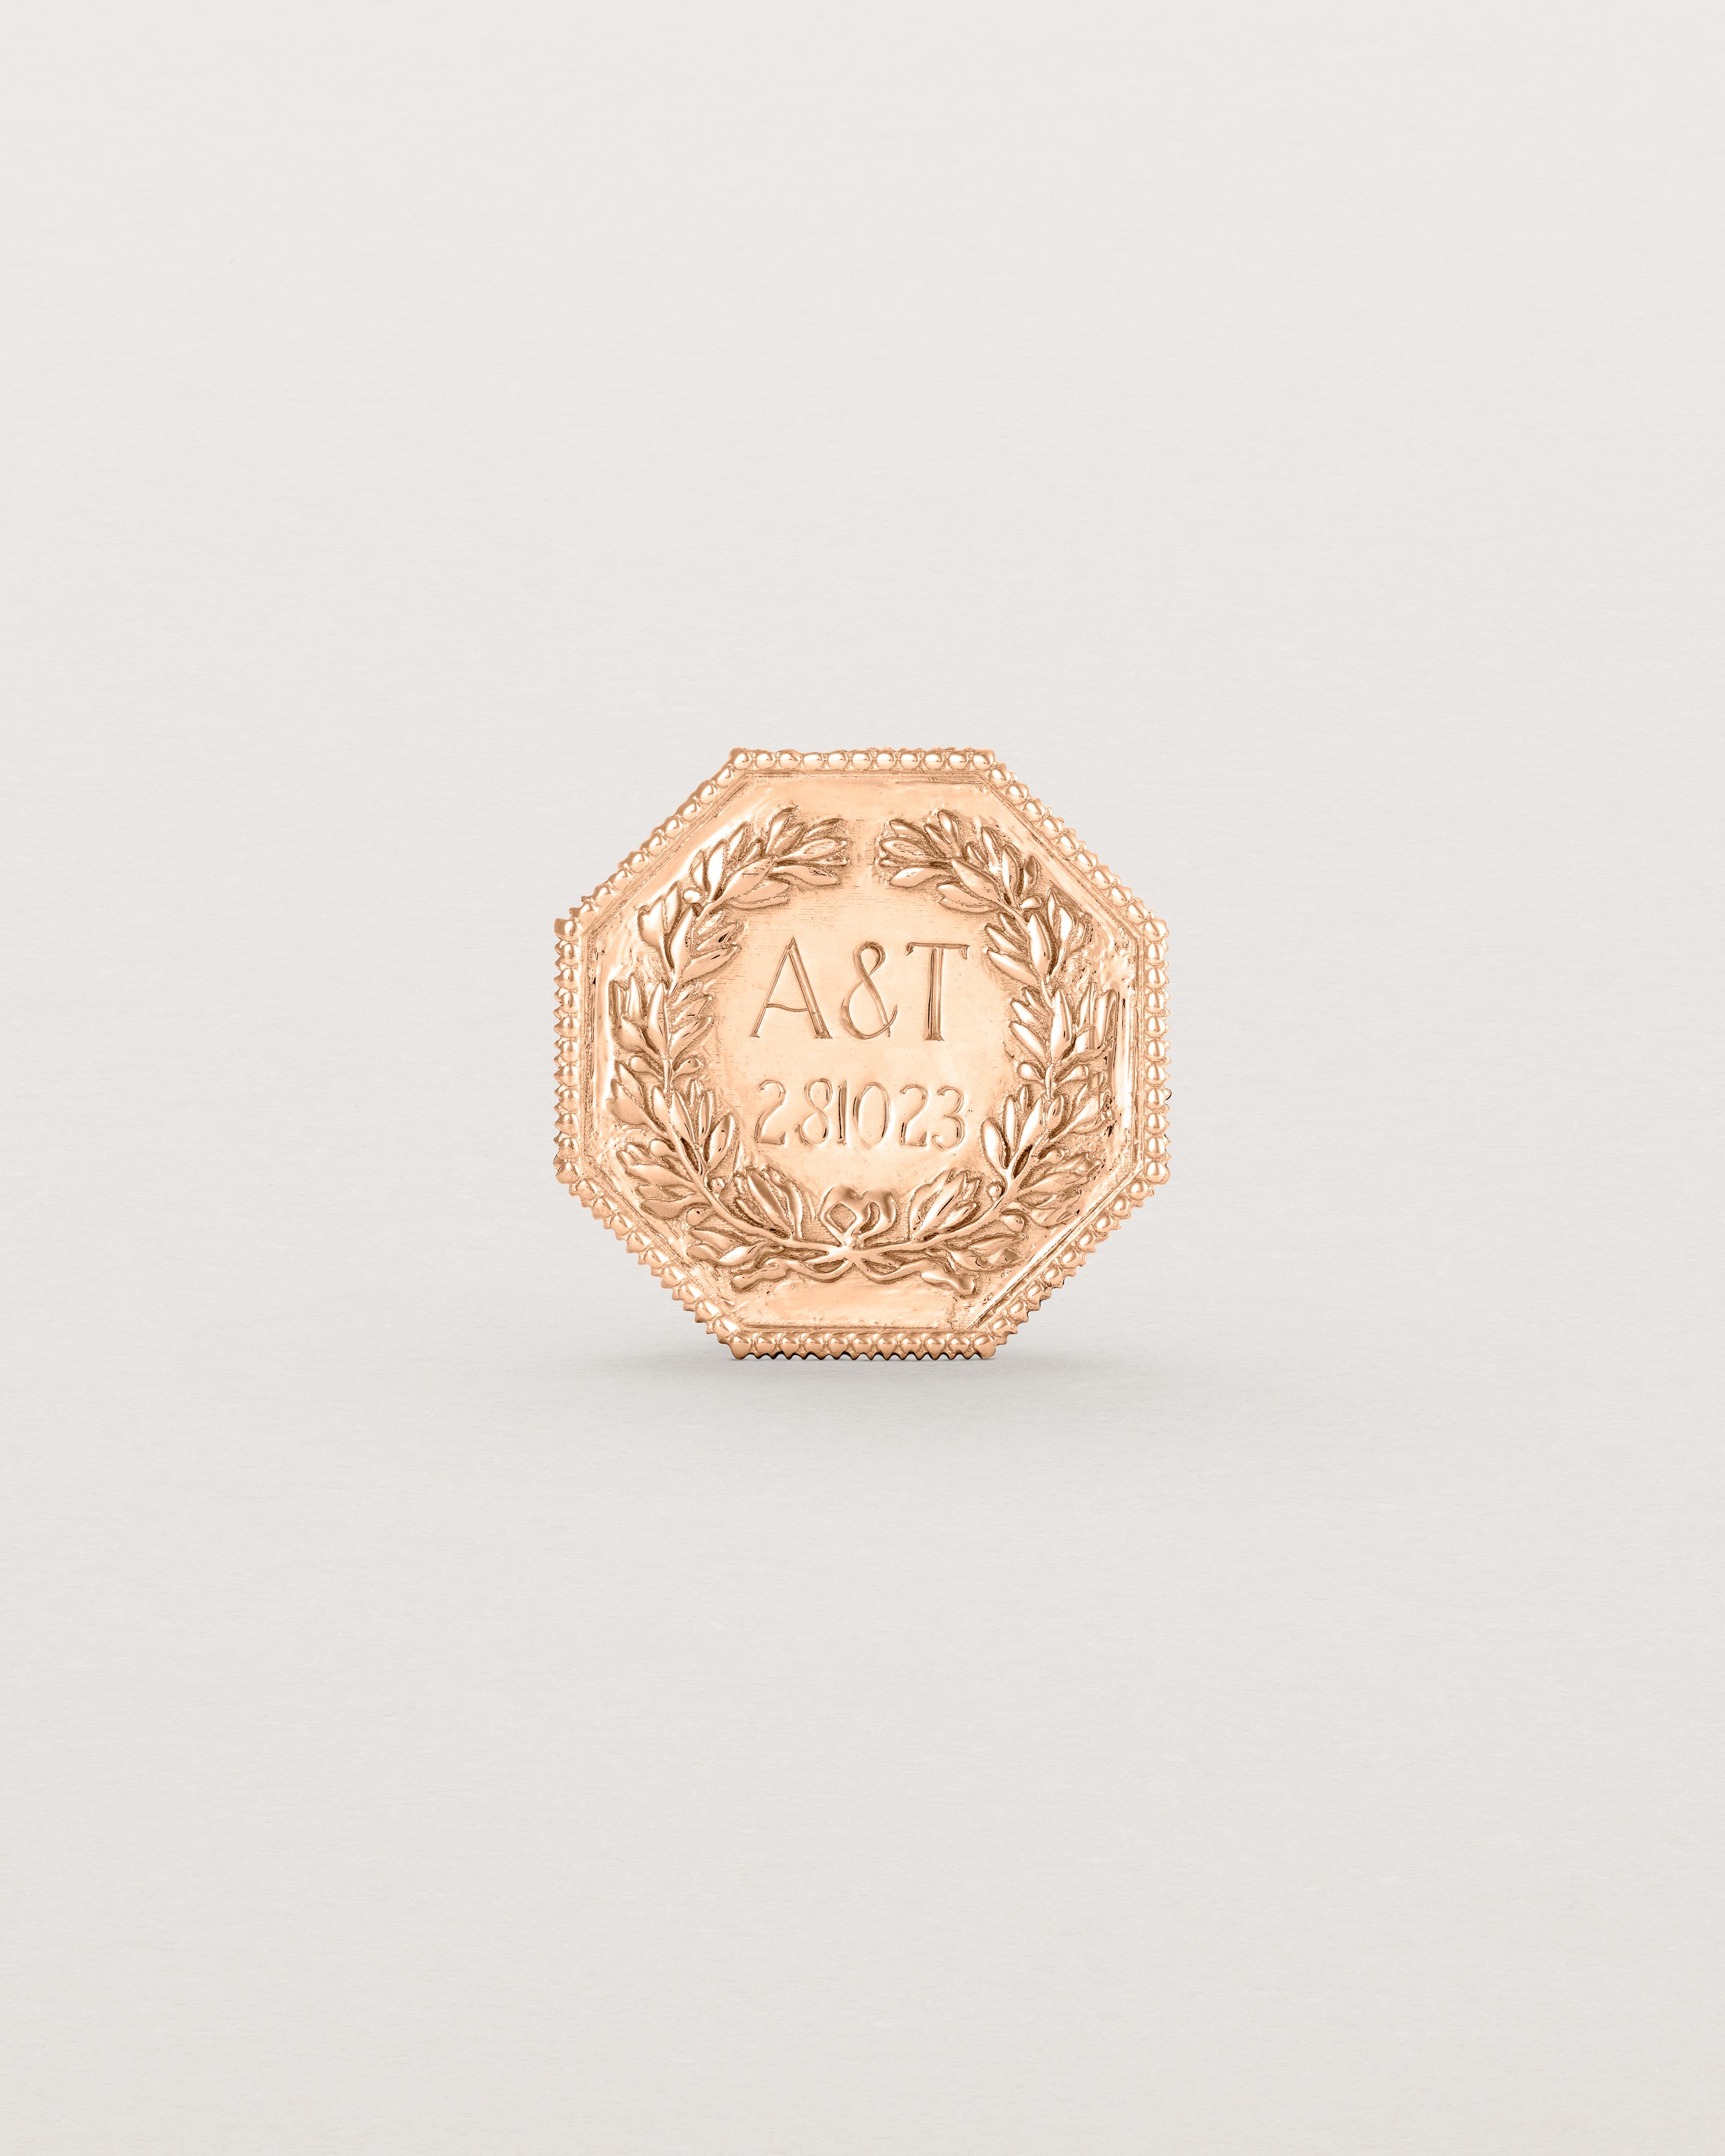 Rose gold six pence coin engraved with a crest and initials